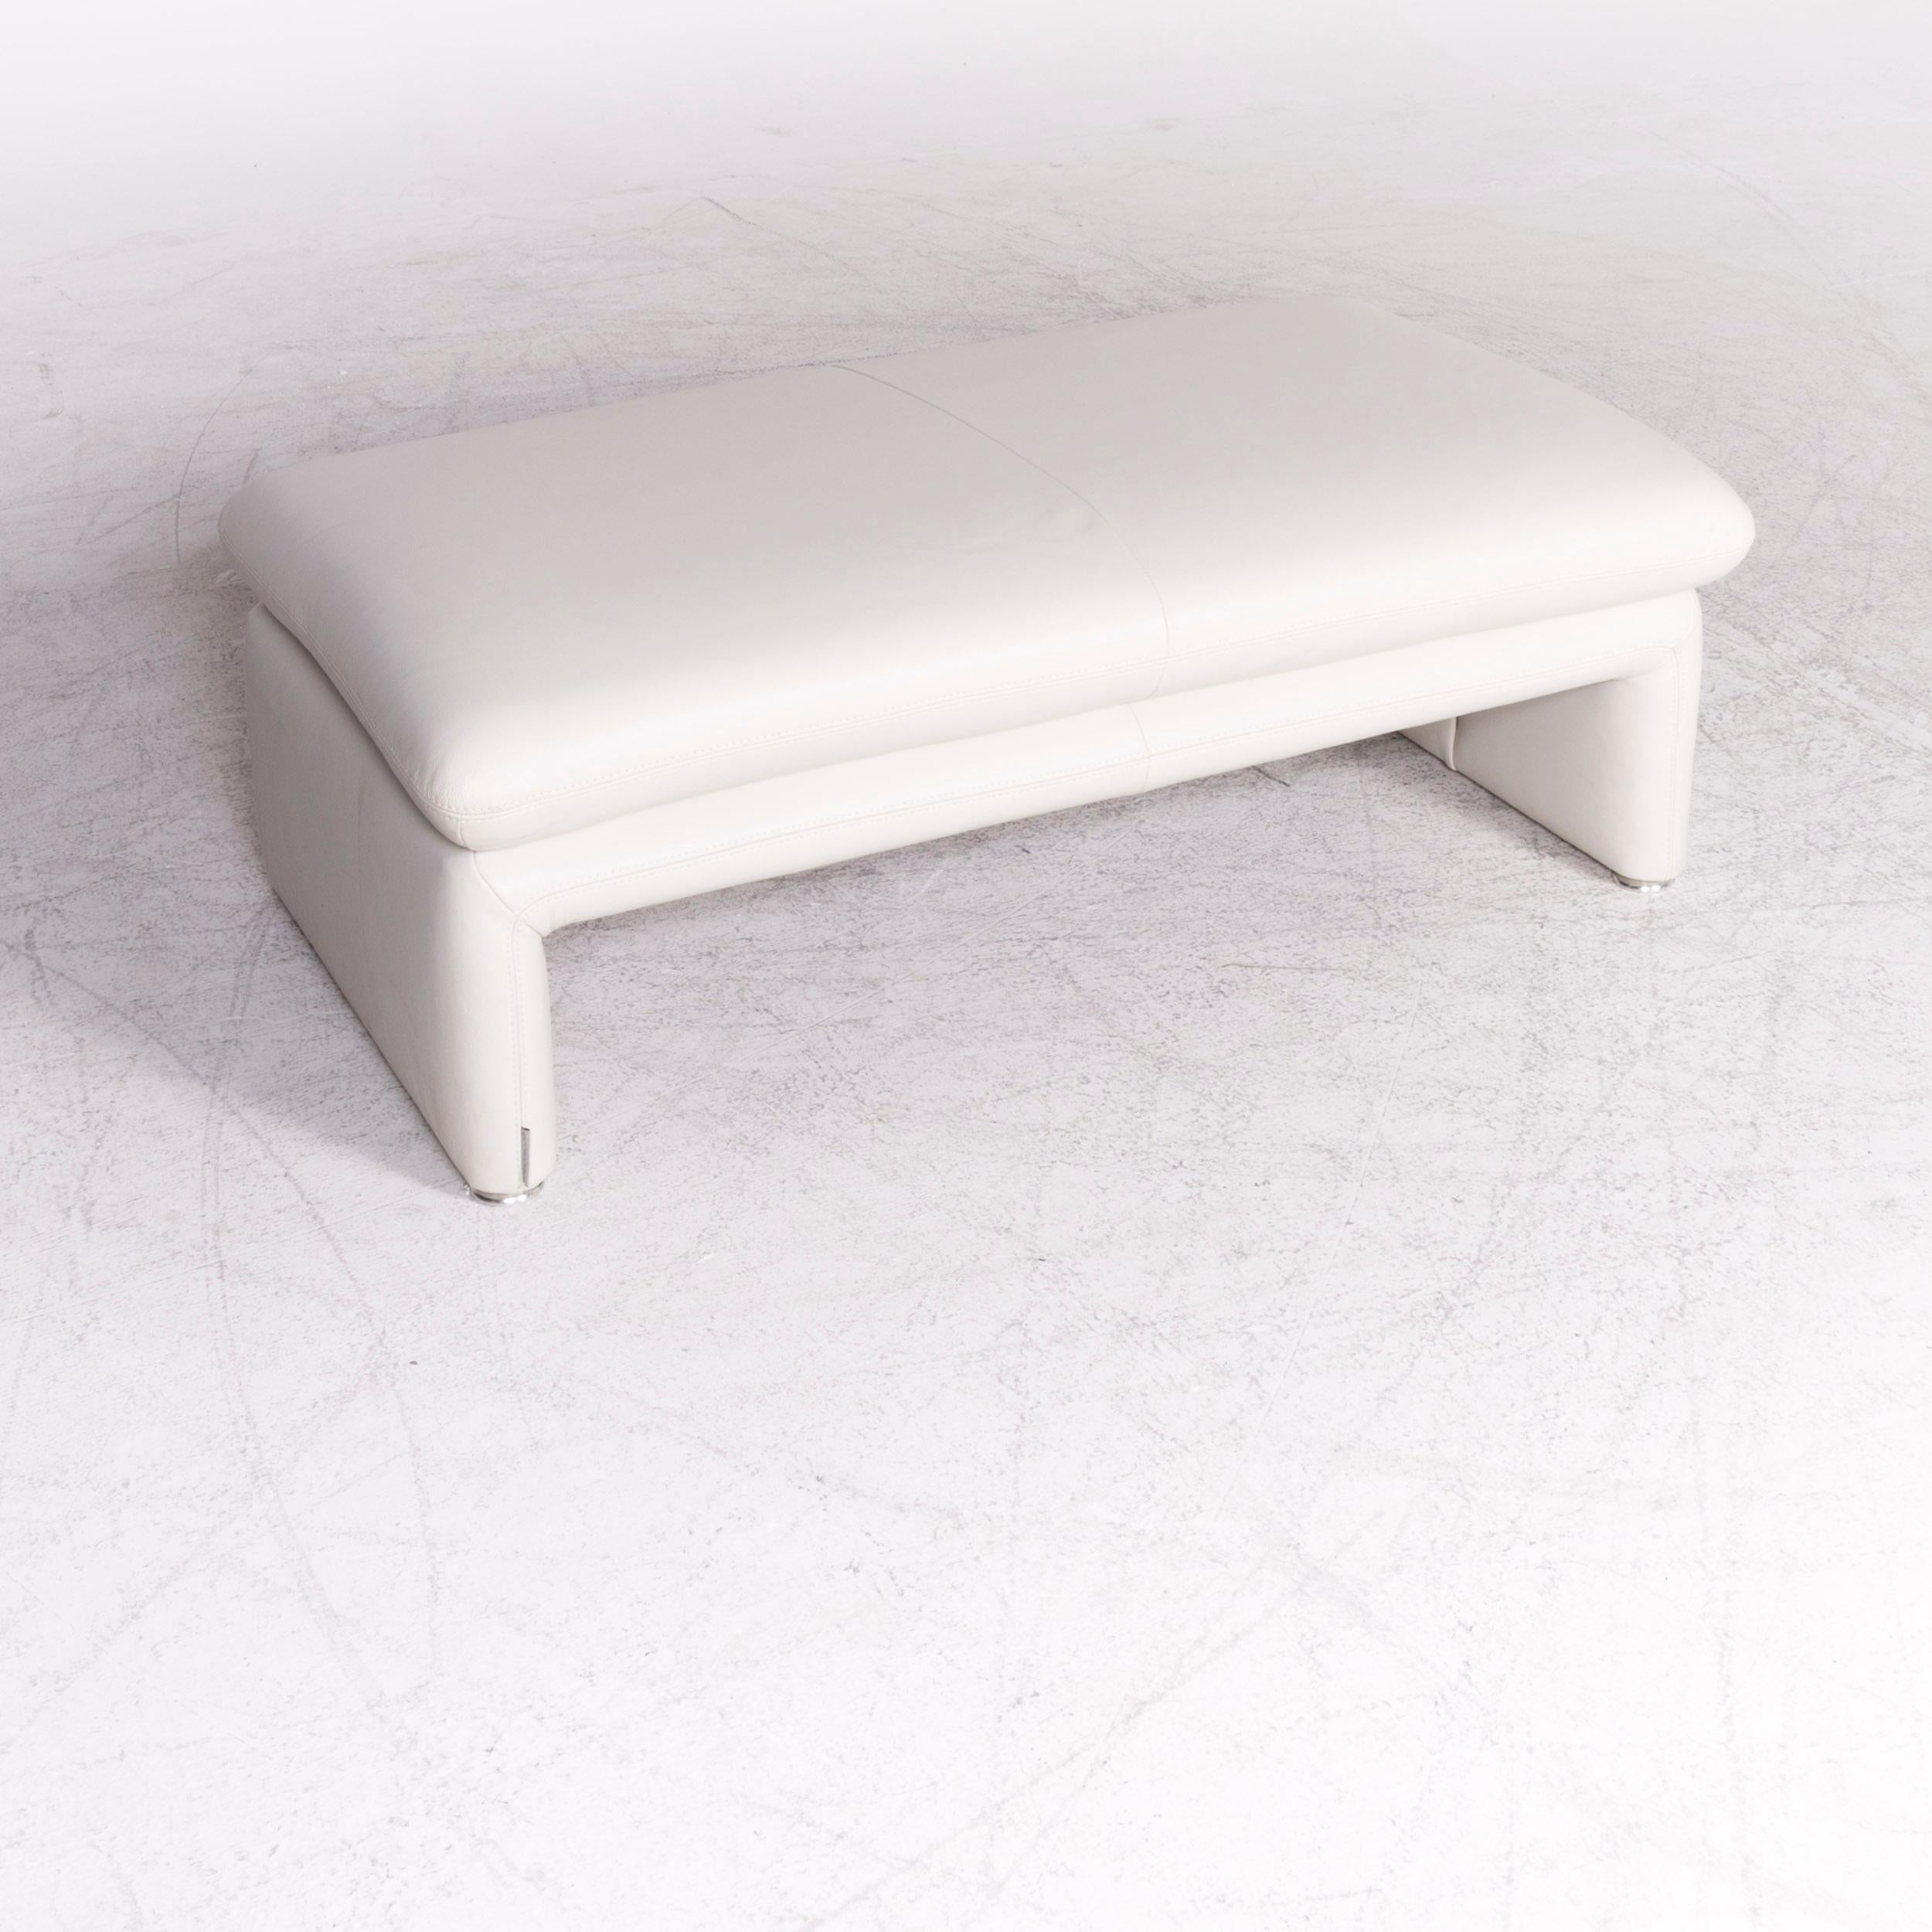 We bring to you a Willi Schillig Brooklyn designer leather stool white genuine leather stool.

Product measurements in centimeters:

Depth 71
Width 124
Height 47.





   